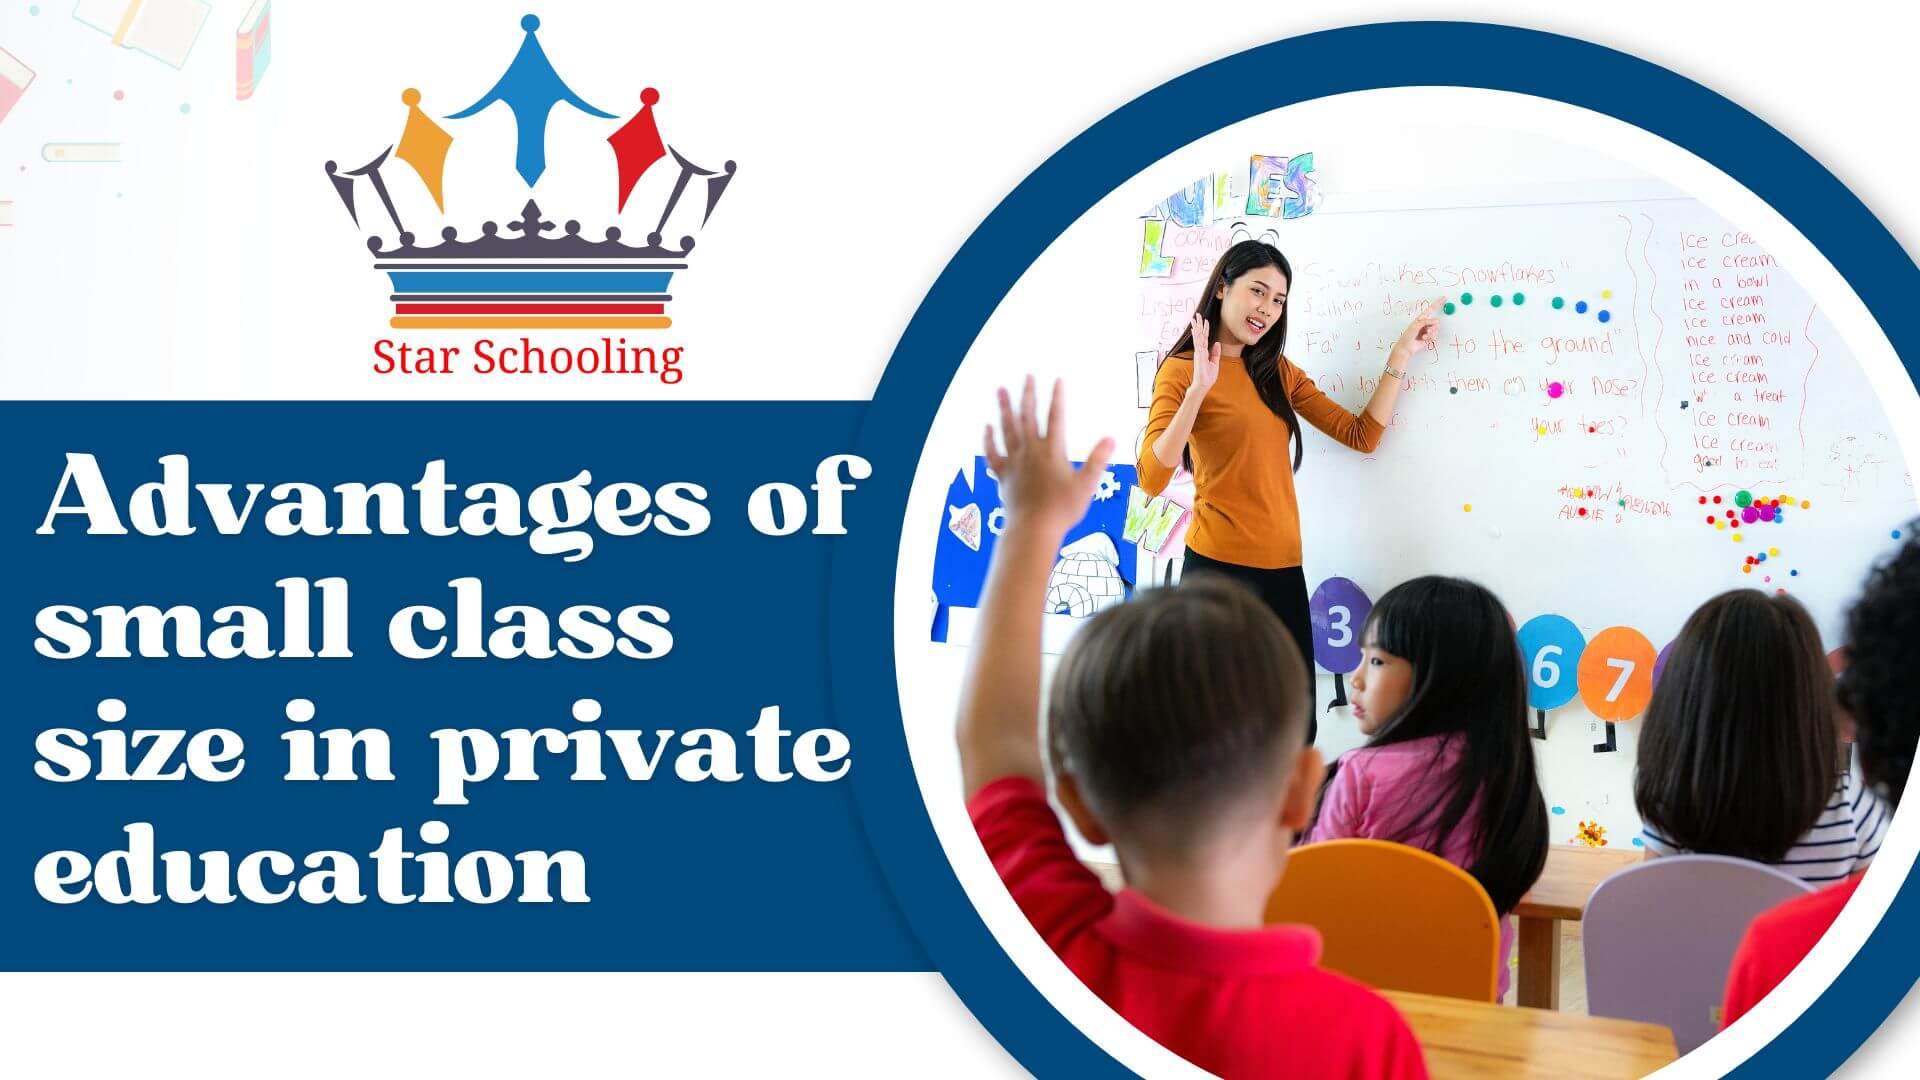 Advantages of small class size in private education